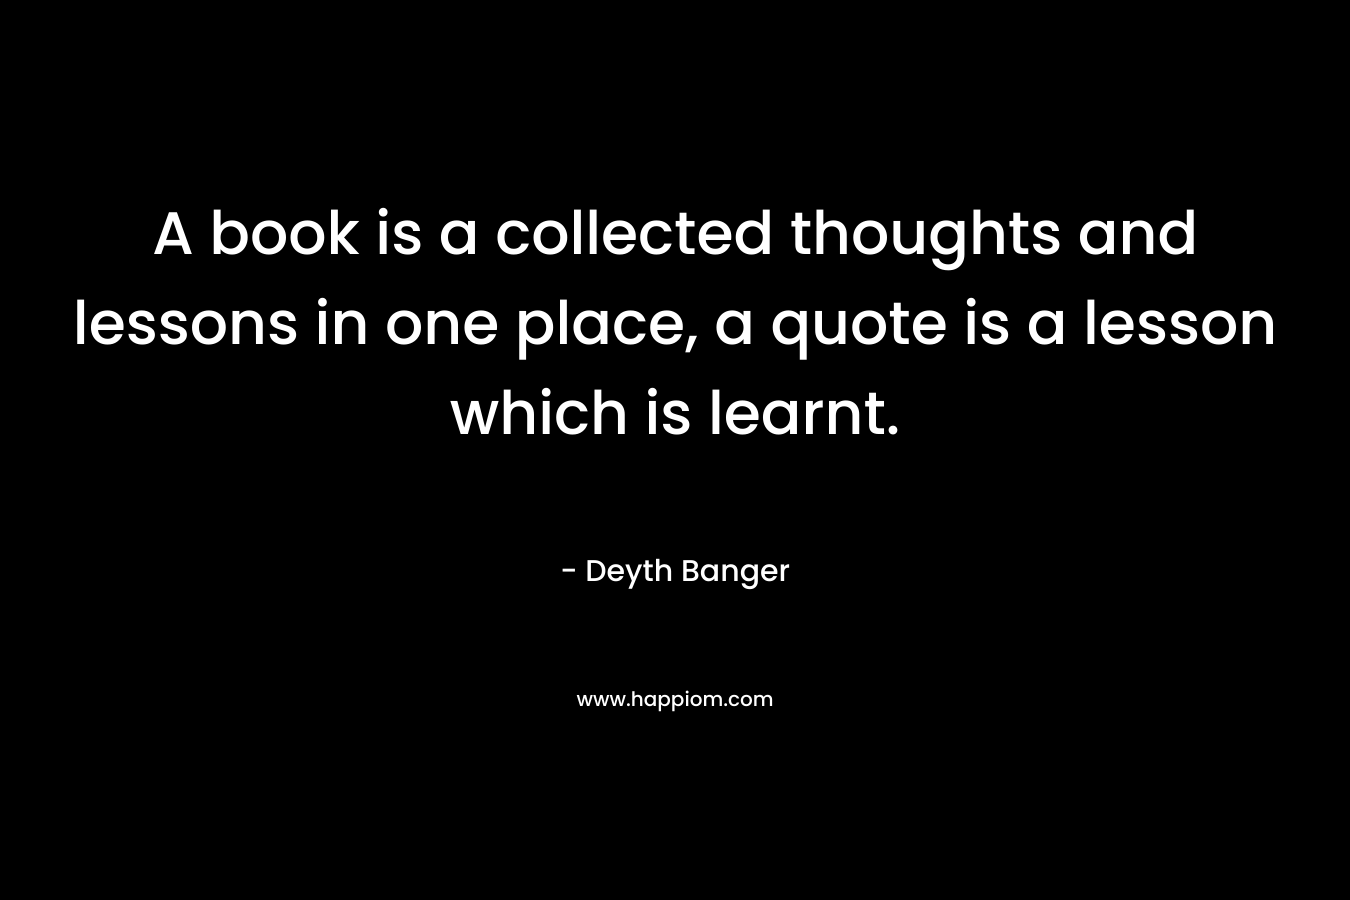 A book is a collected thoughts and lessons in one place, a quote is a lesson which is learnt.